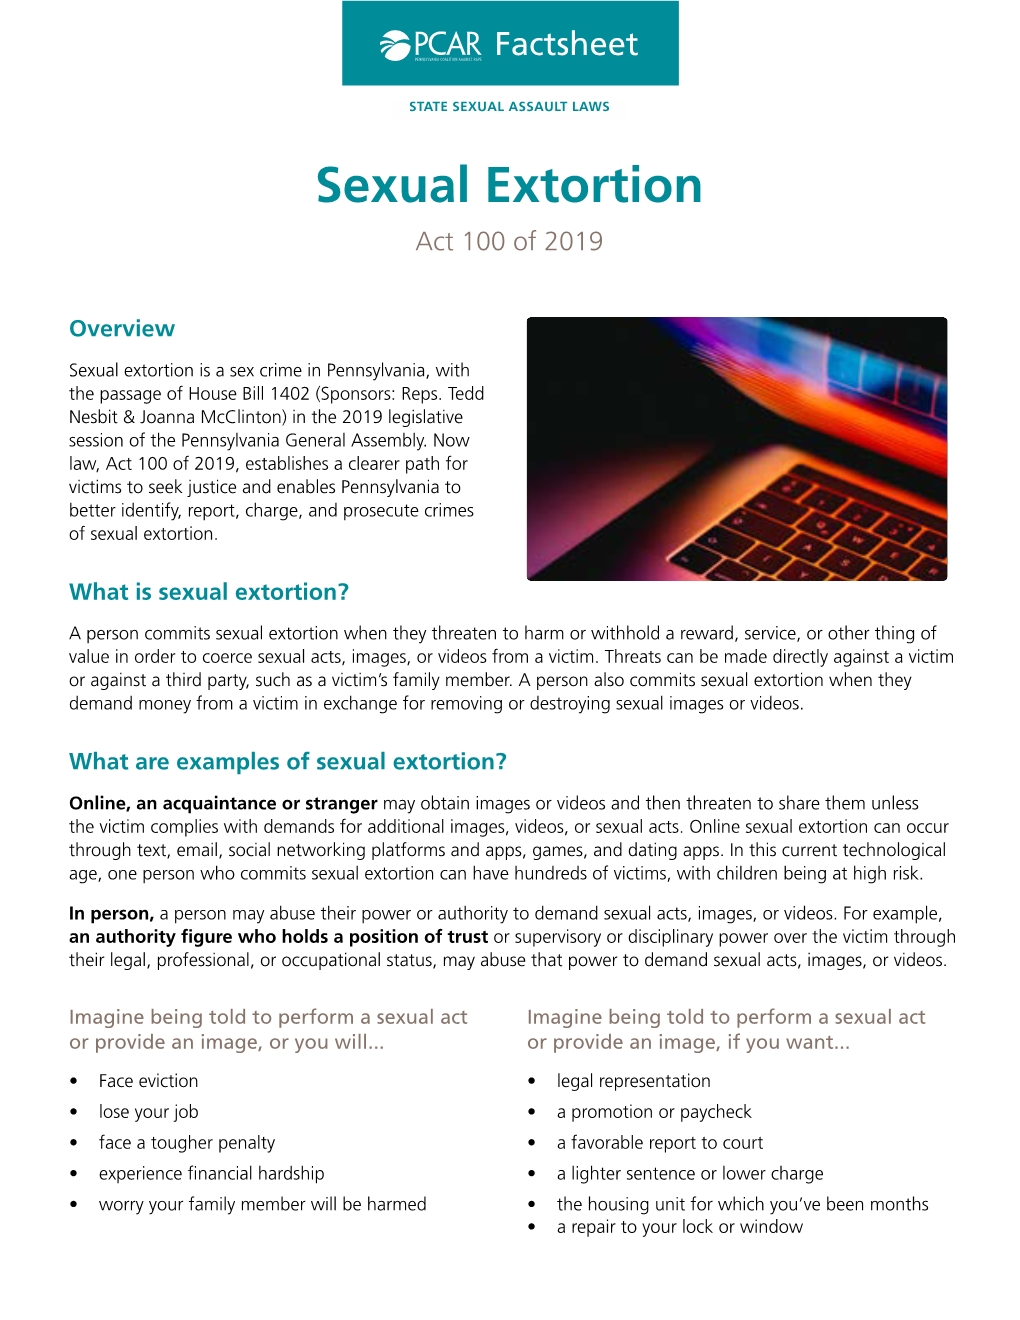 Sexual Extortion Act 100 of 2019